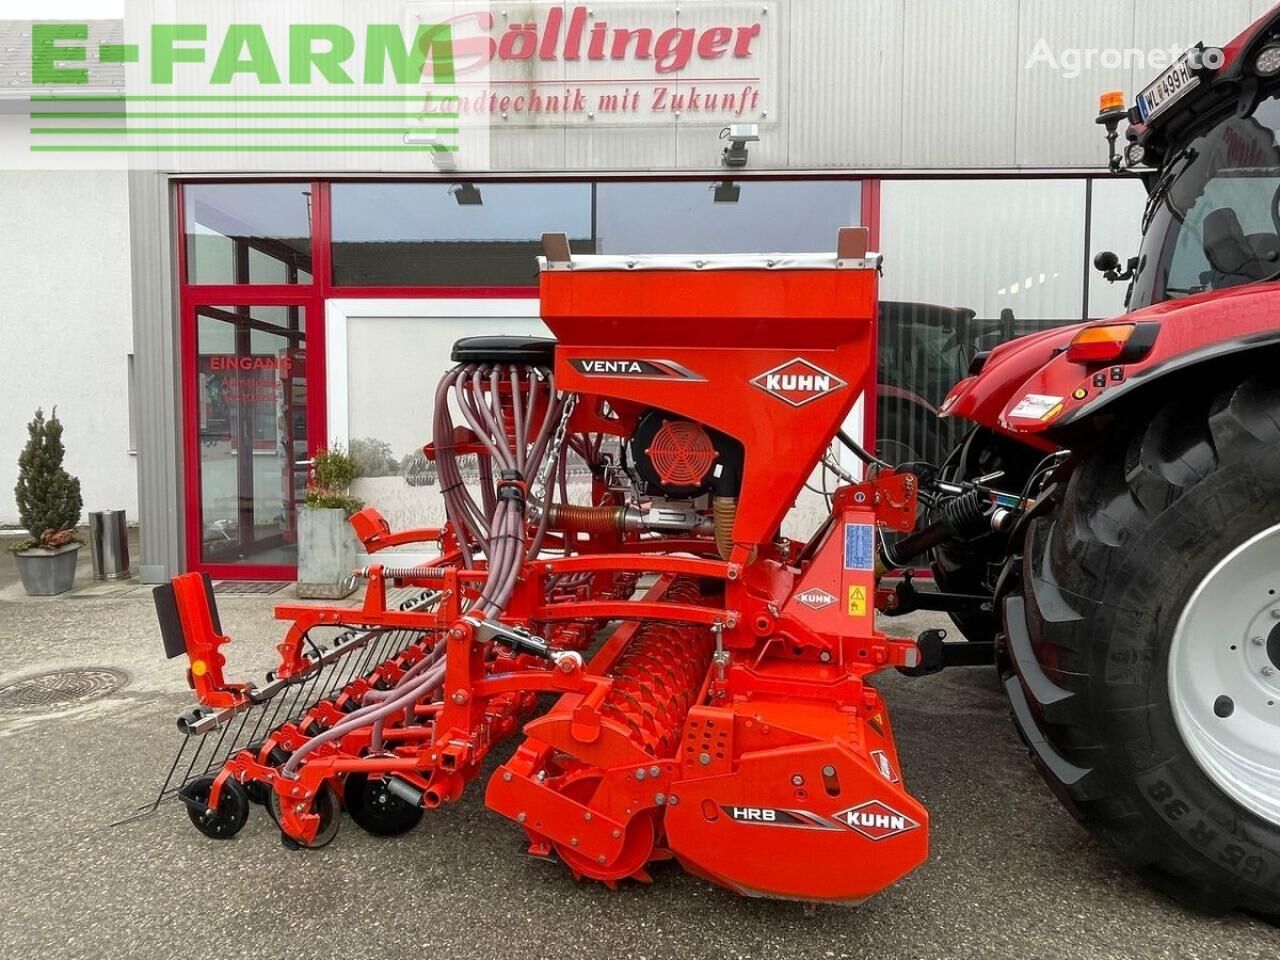 Kuhn hrb 303d + venta 320-24 combine seed drill